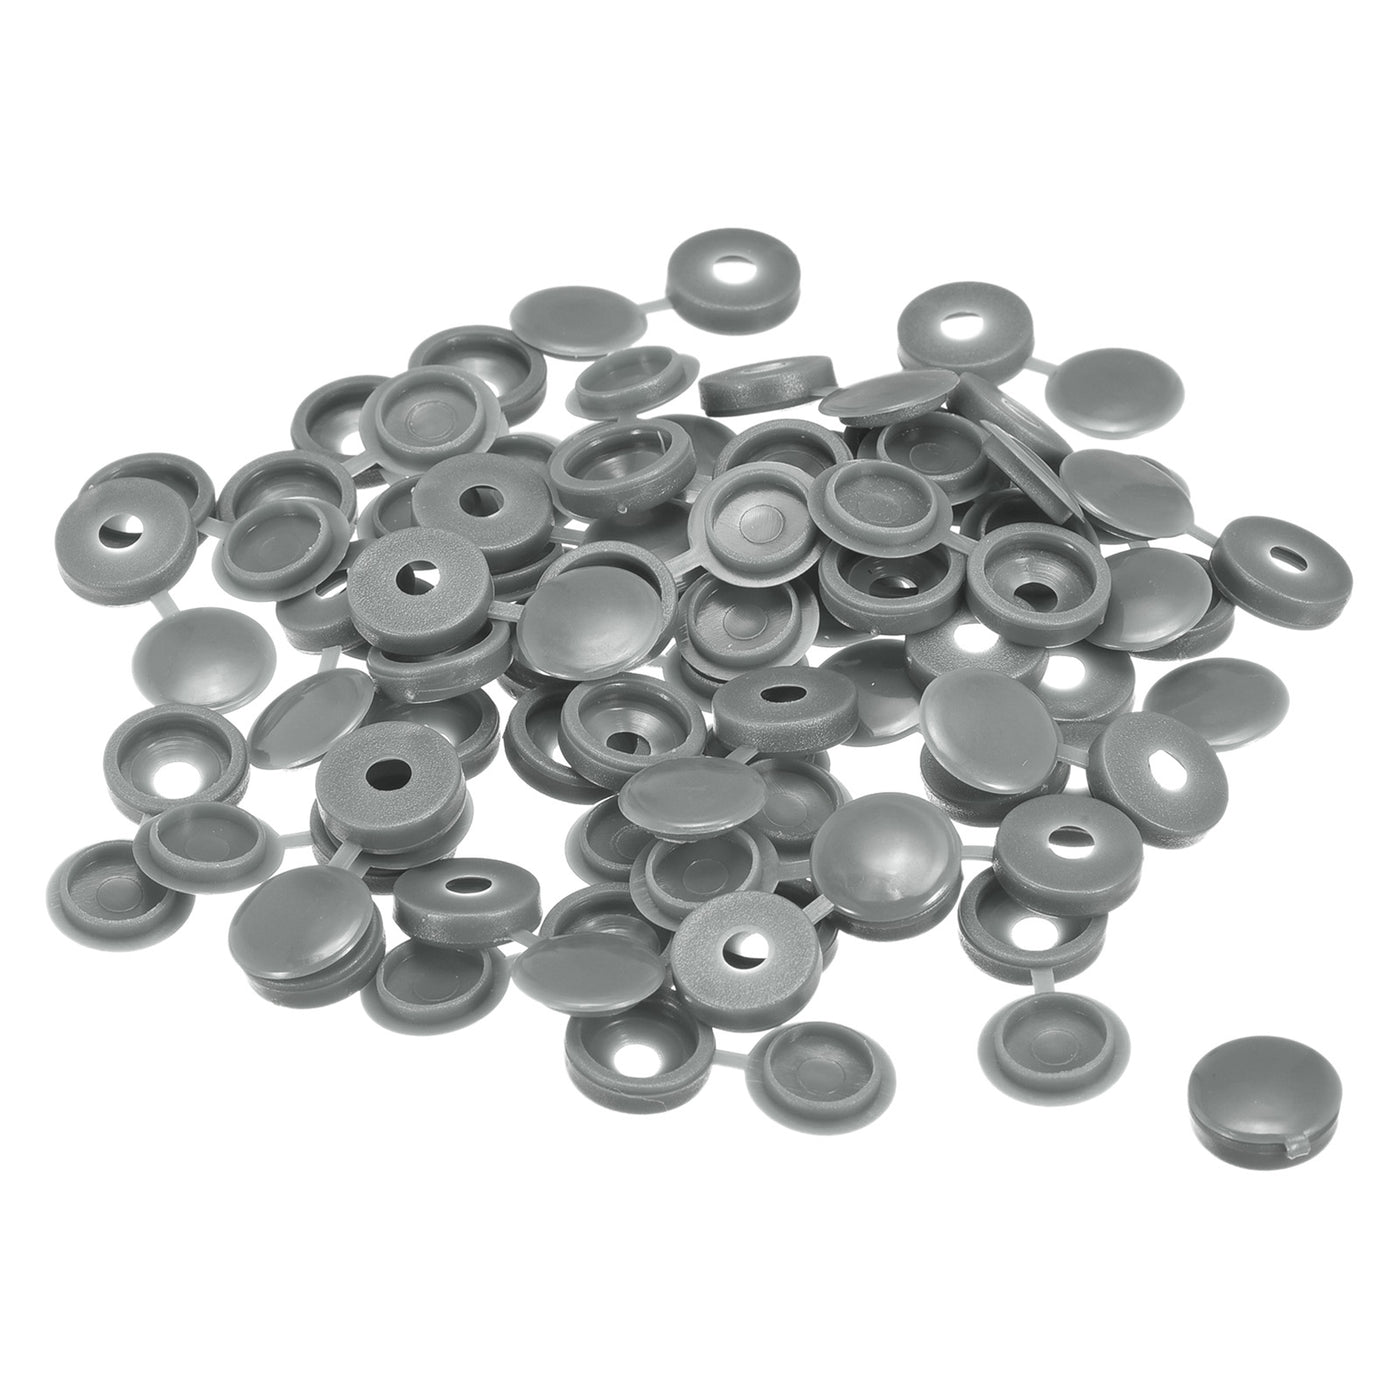 uxcell Uxcell 100Pcs 5mm Hinged Screw Cover Caps Plastic Fold Screw Snap Covers, Gray